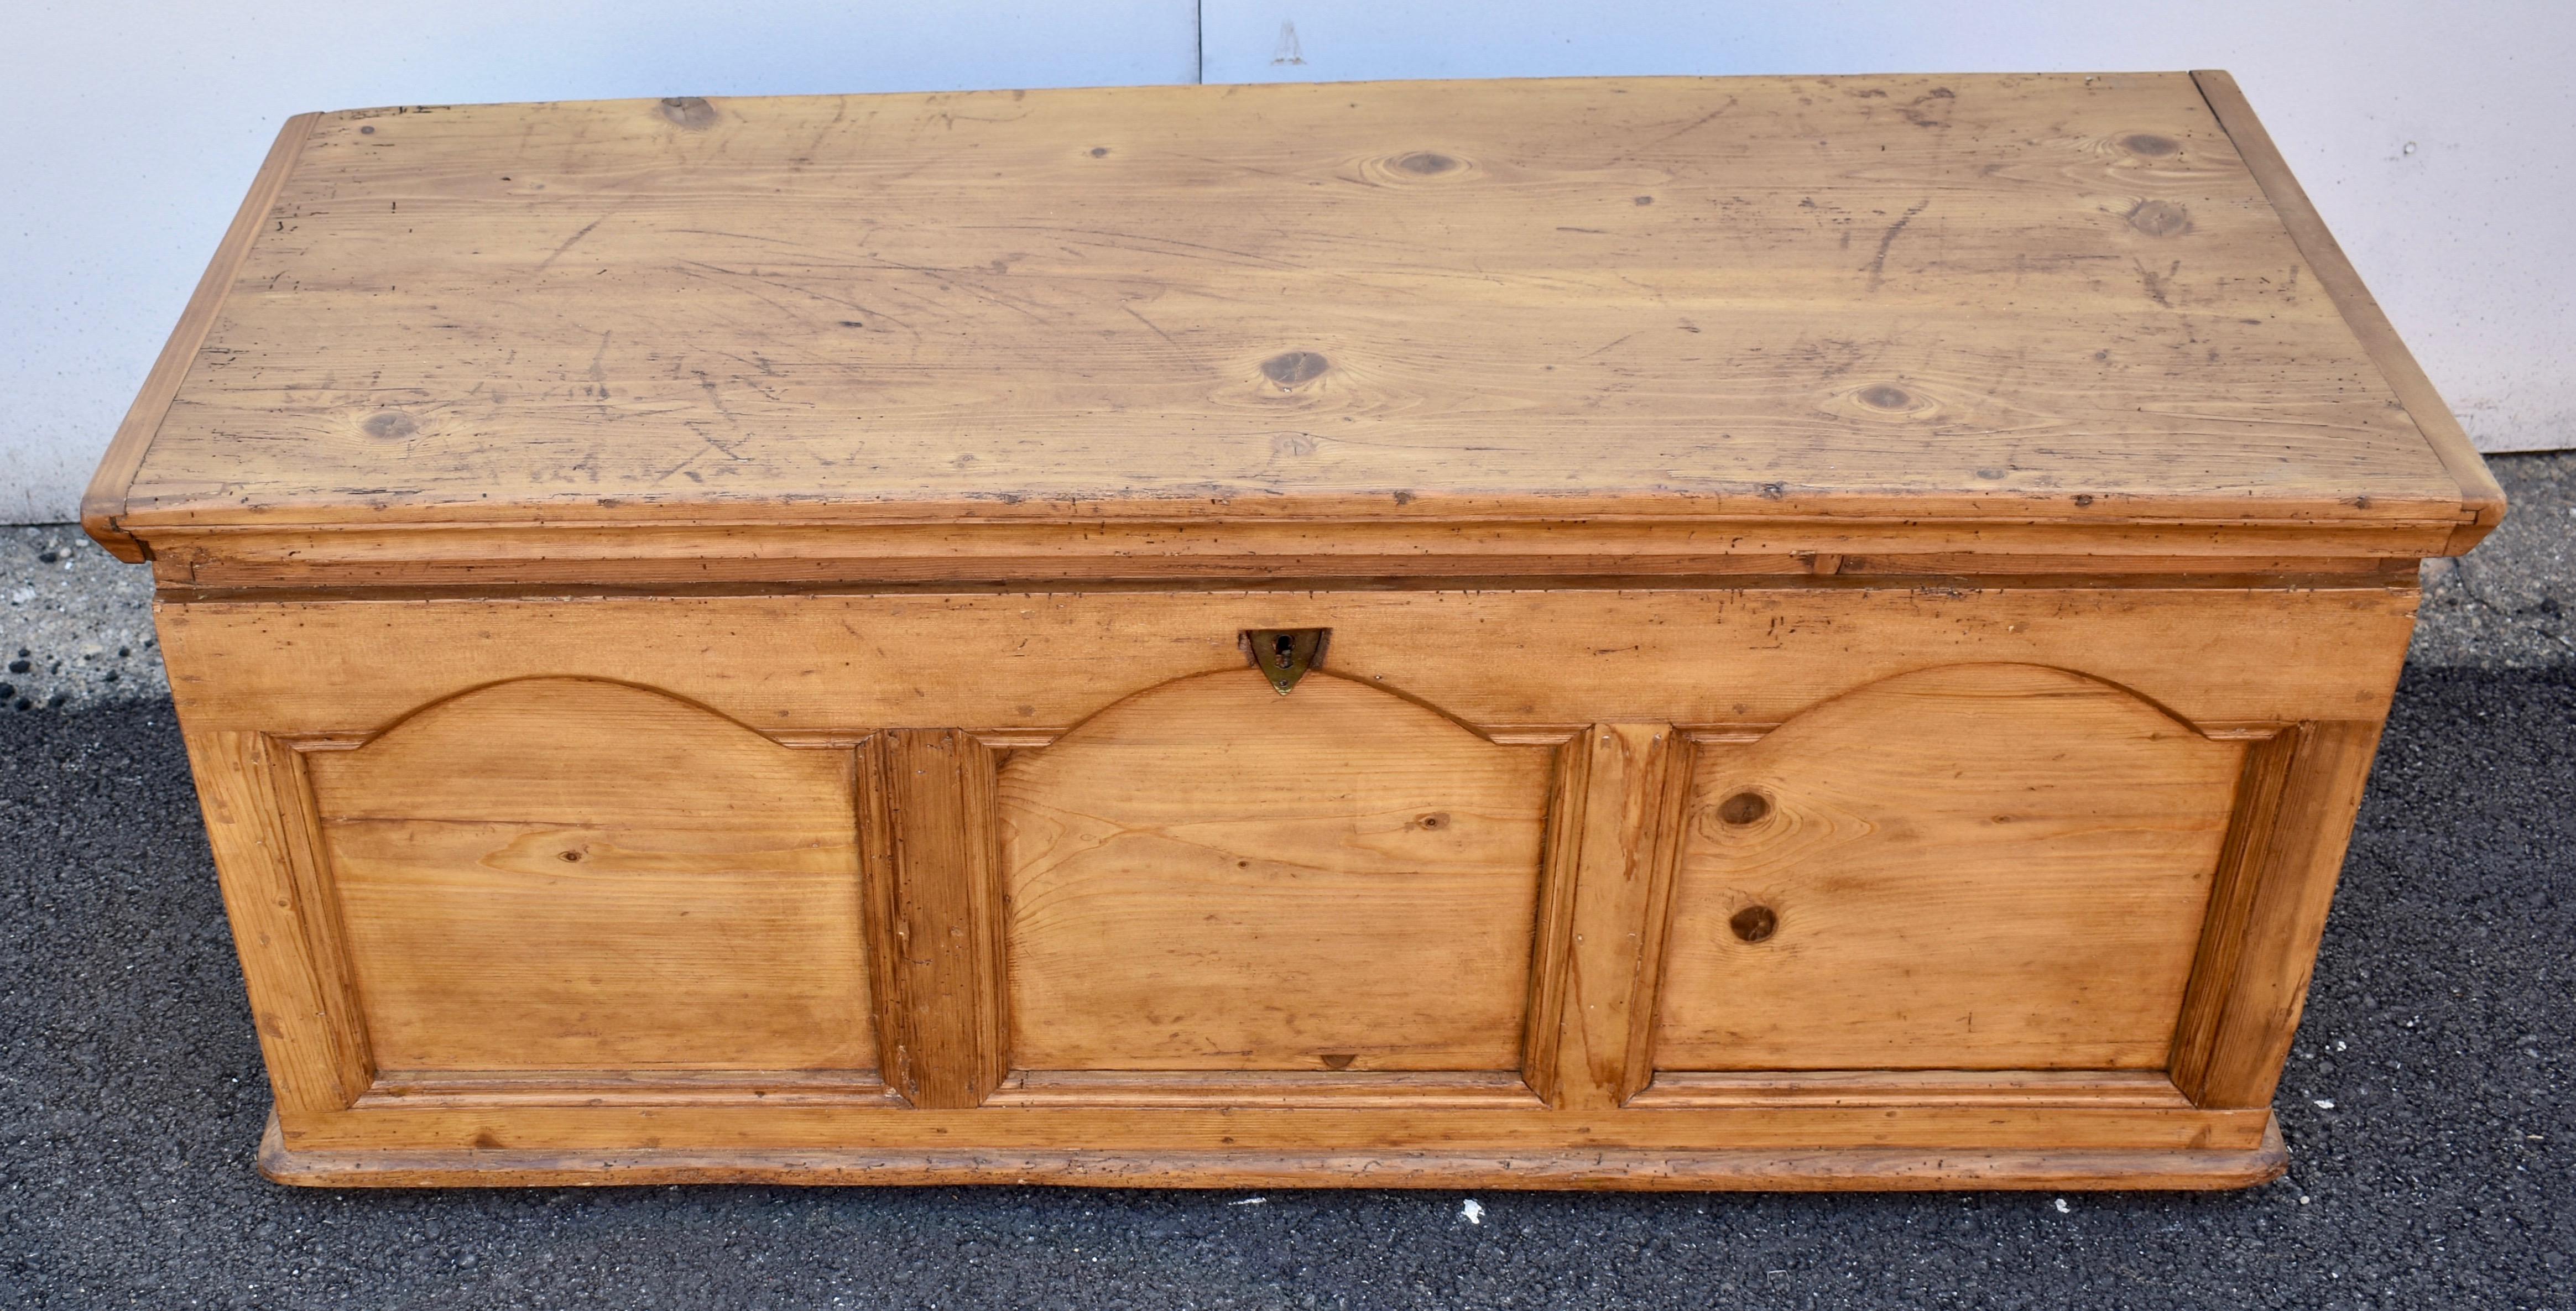 What an outstanding trunk!  Long and slender and, at 19.5” high, ideal for coffee table use, or to place at the foot of a full or queen size bed, it has a lovely warm honey color and superb dovetailed construction.  The breadboard ends of the lid